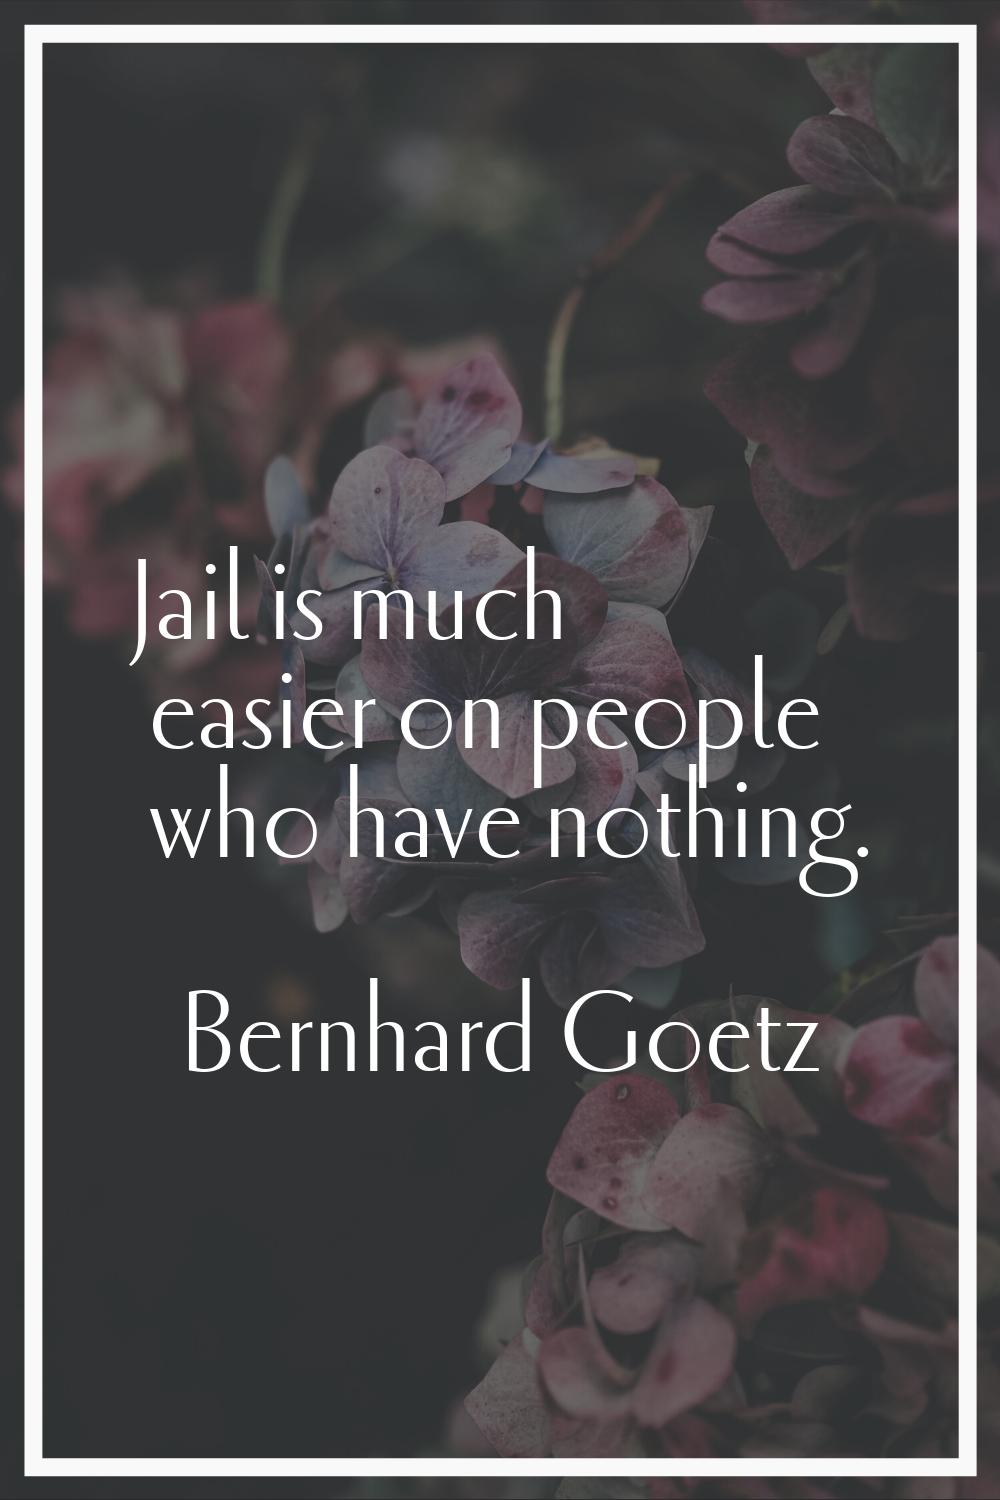 Jail is much easier on people who have nothing.